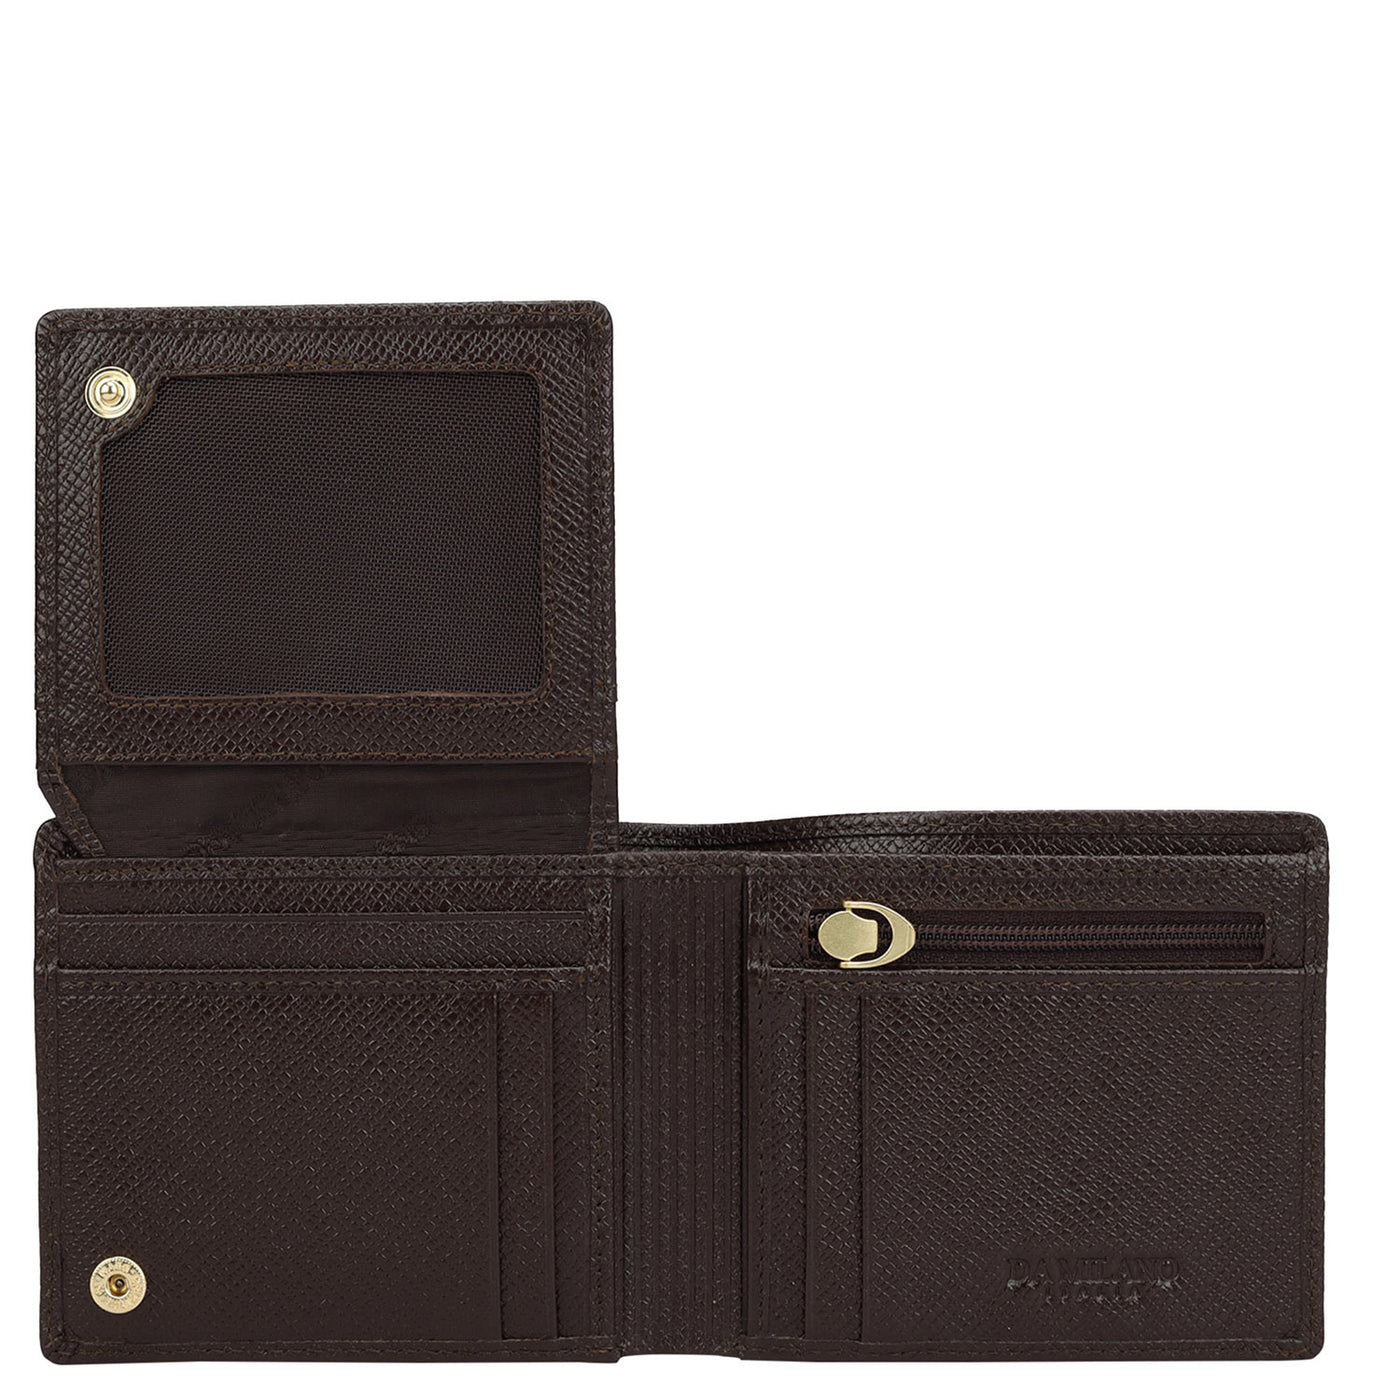 Chocolate Saffiano Franzy Leather Mens Wallet & Belt Gift Set